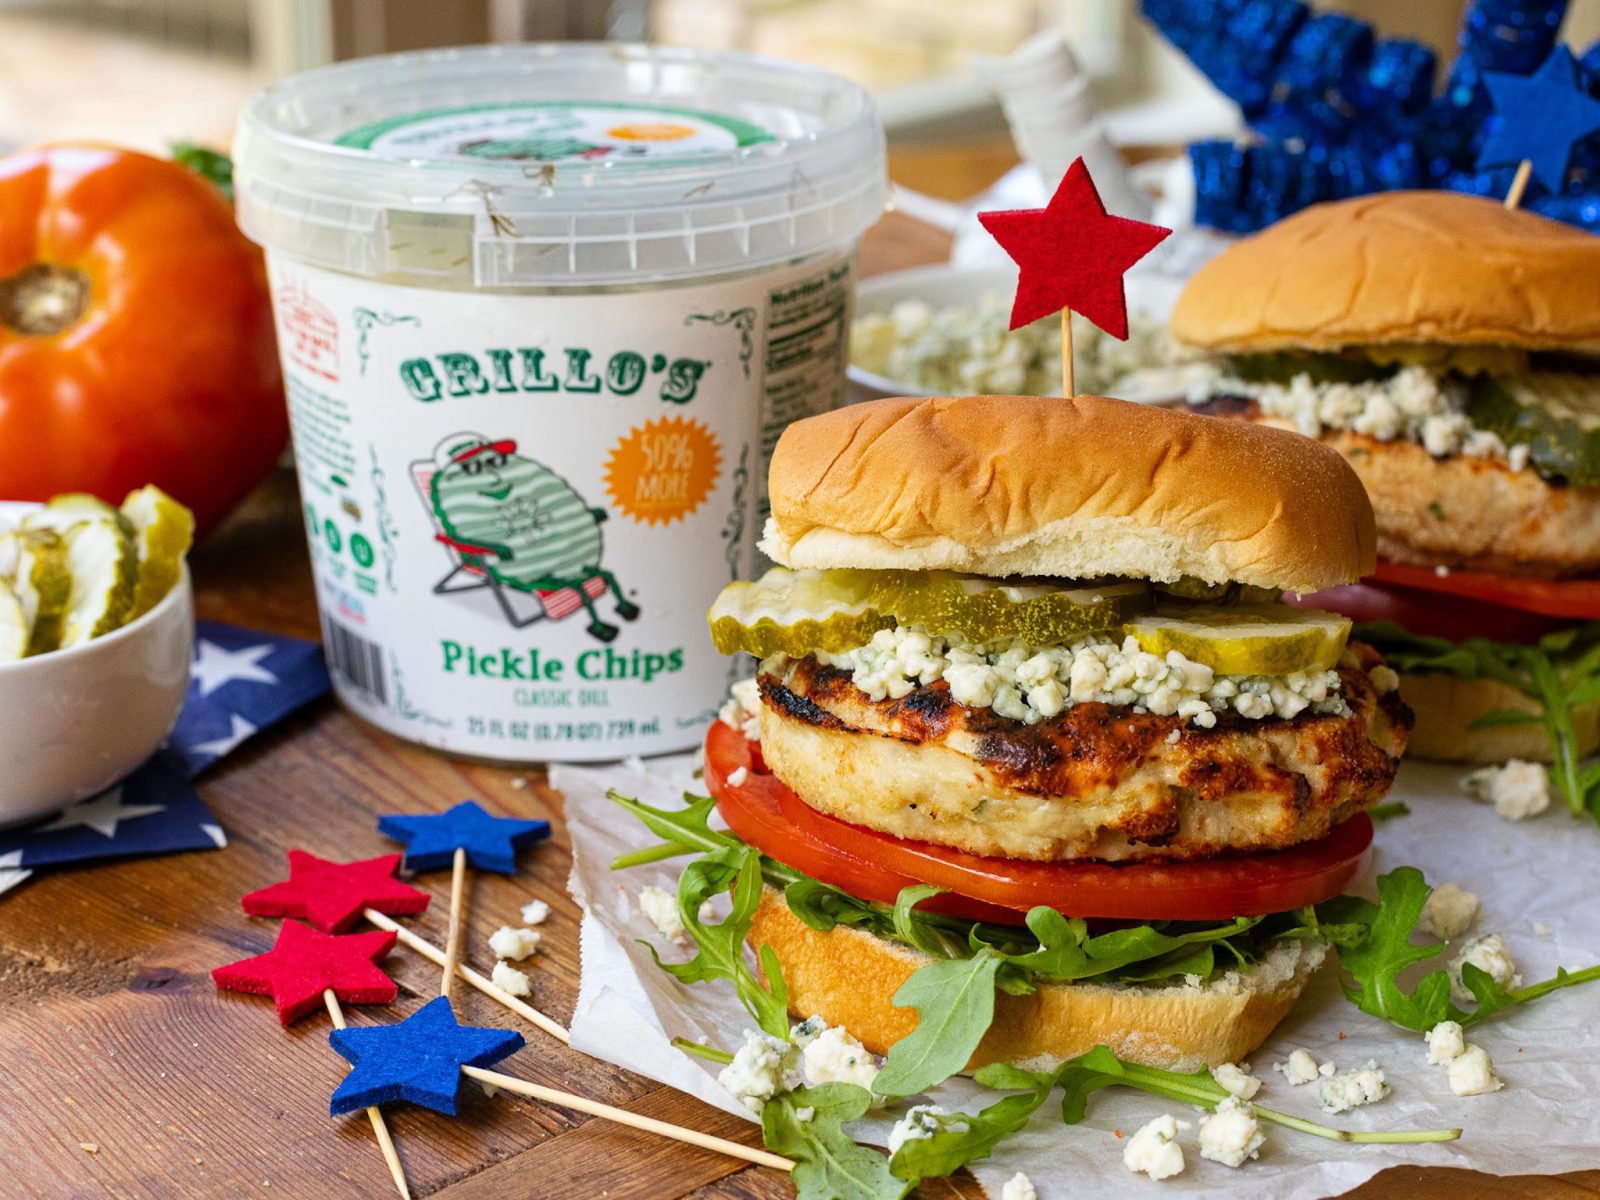 Pick Up Grillo’s Pickle Chips & Serve Up My Red, White & Bleu Grilled Chicken Burger At Your 4th Of July Celebration